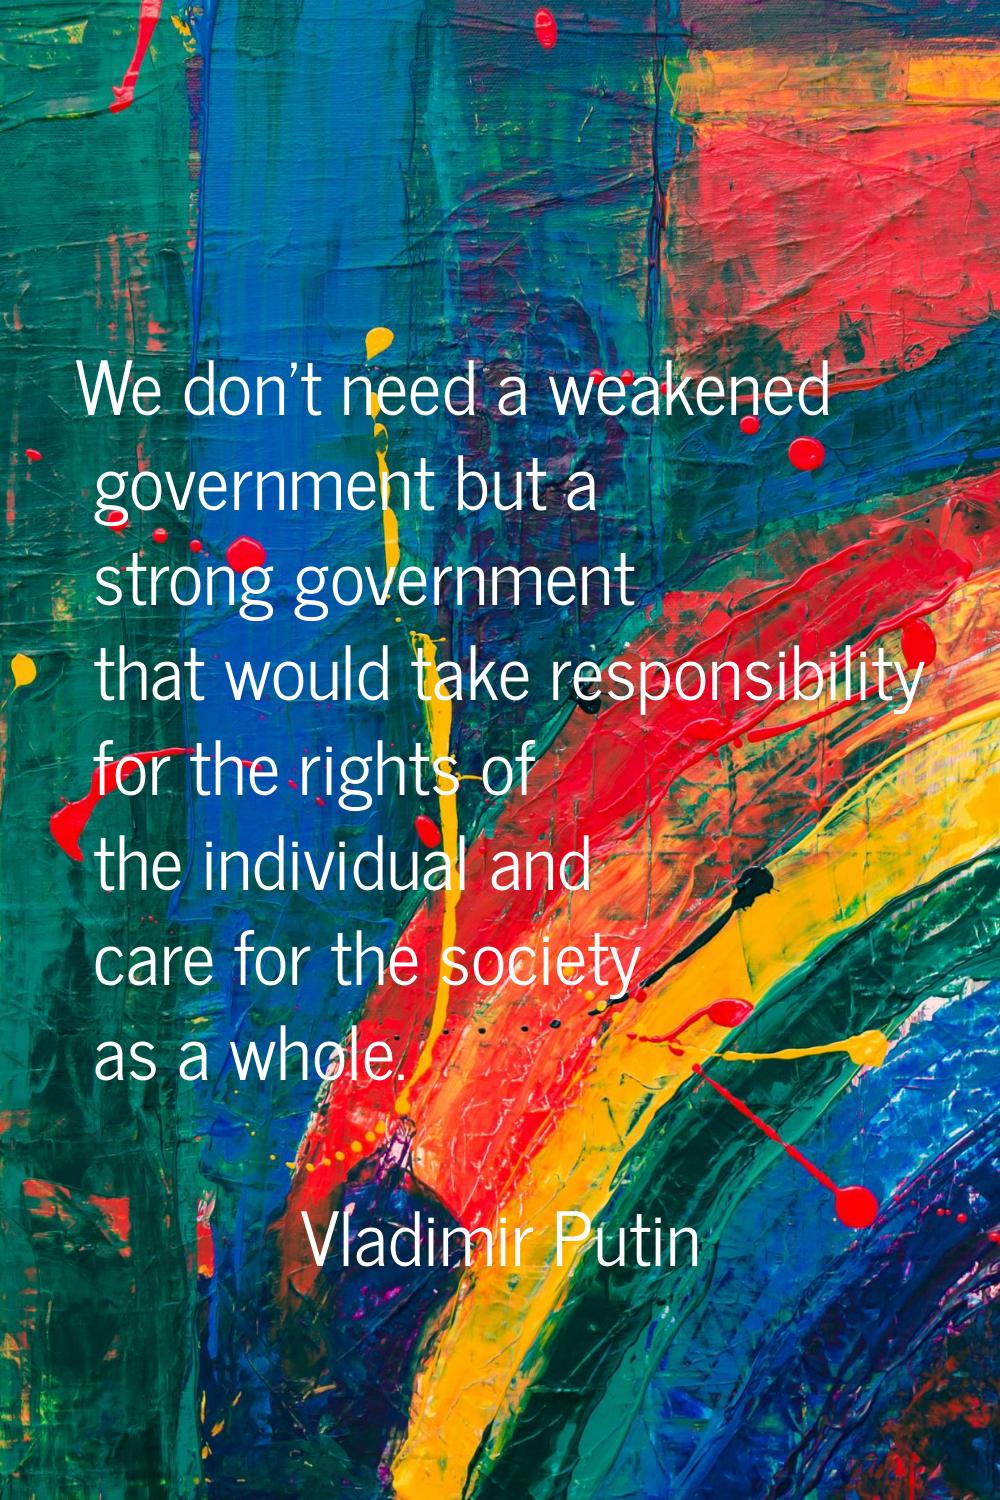 We don't need a weakened government but a strong government that would take responsibility for the 